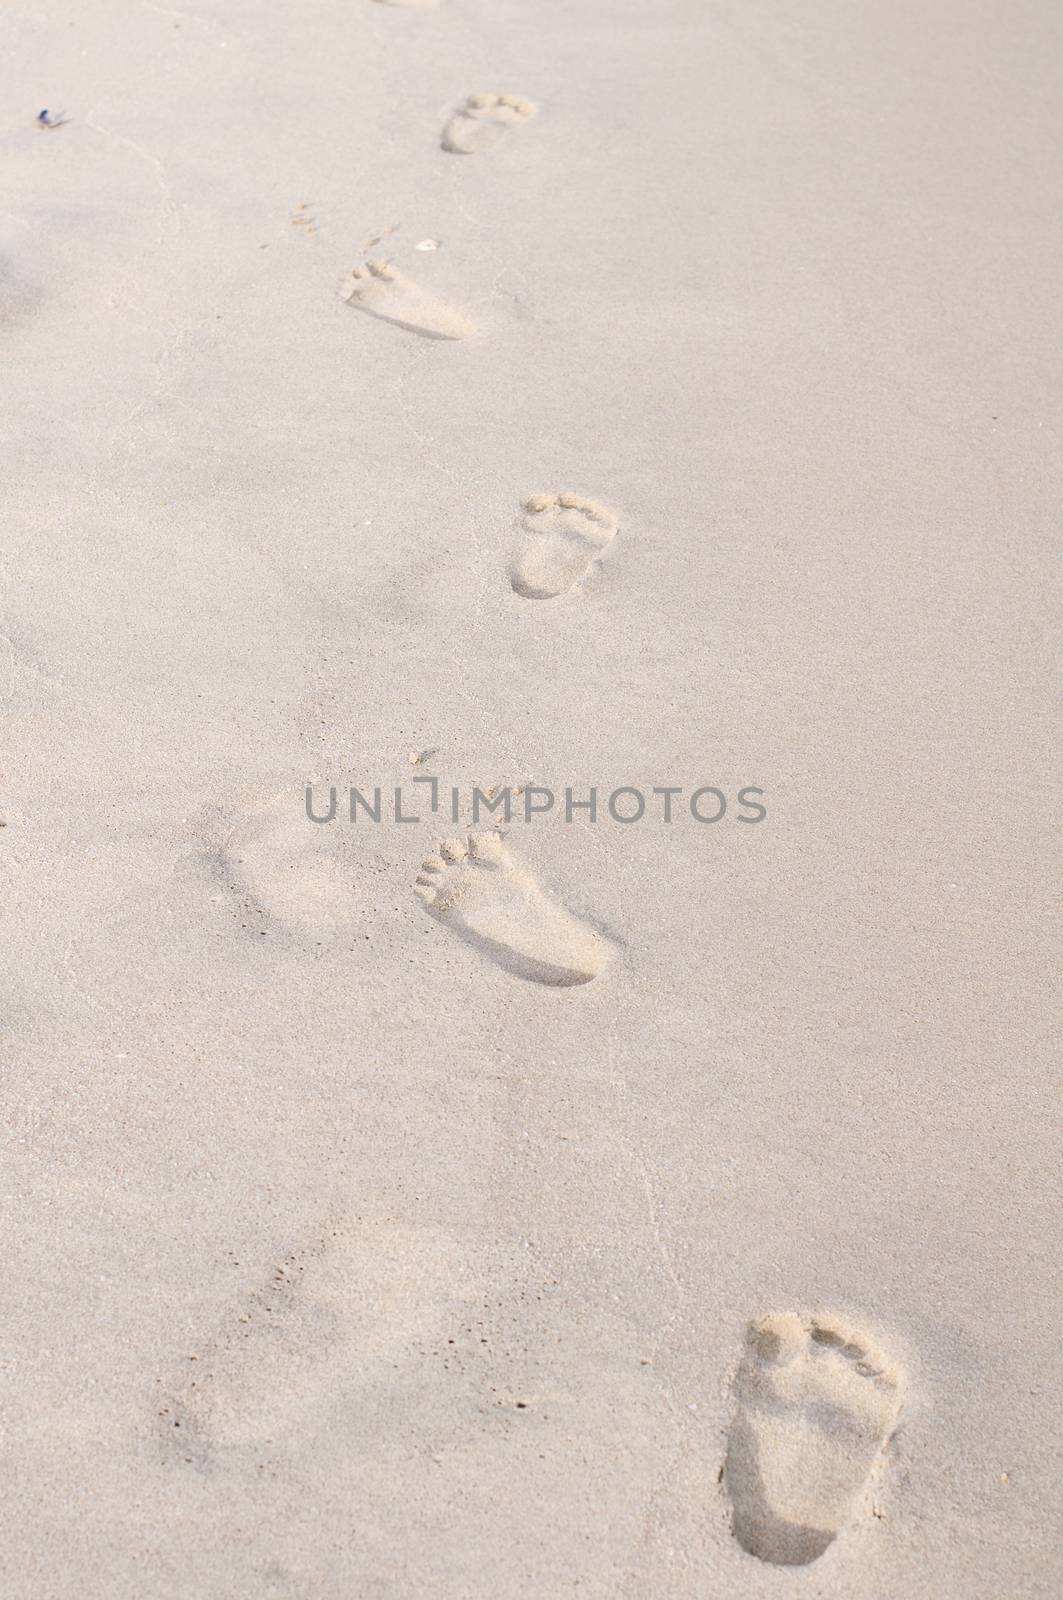 Footprints in wet sand of the beach